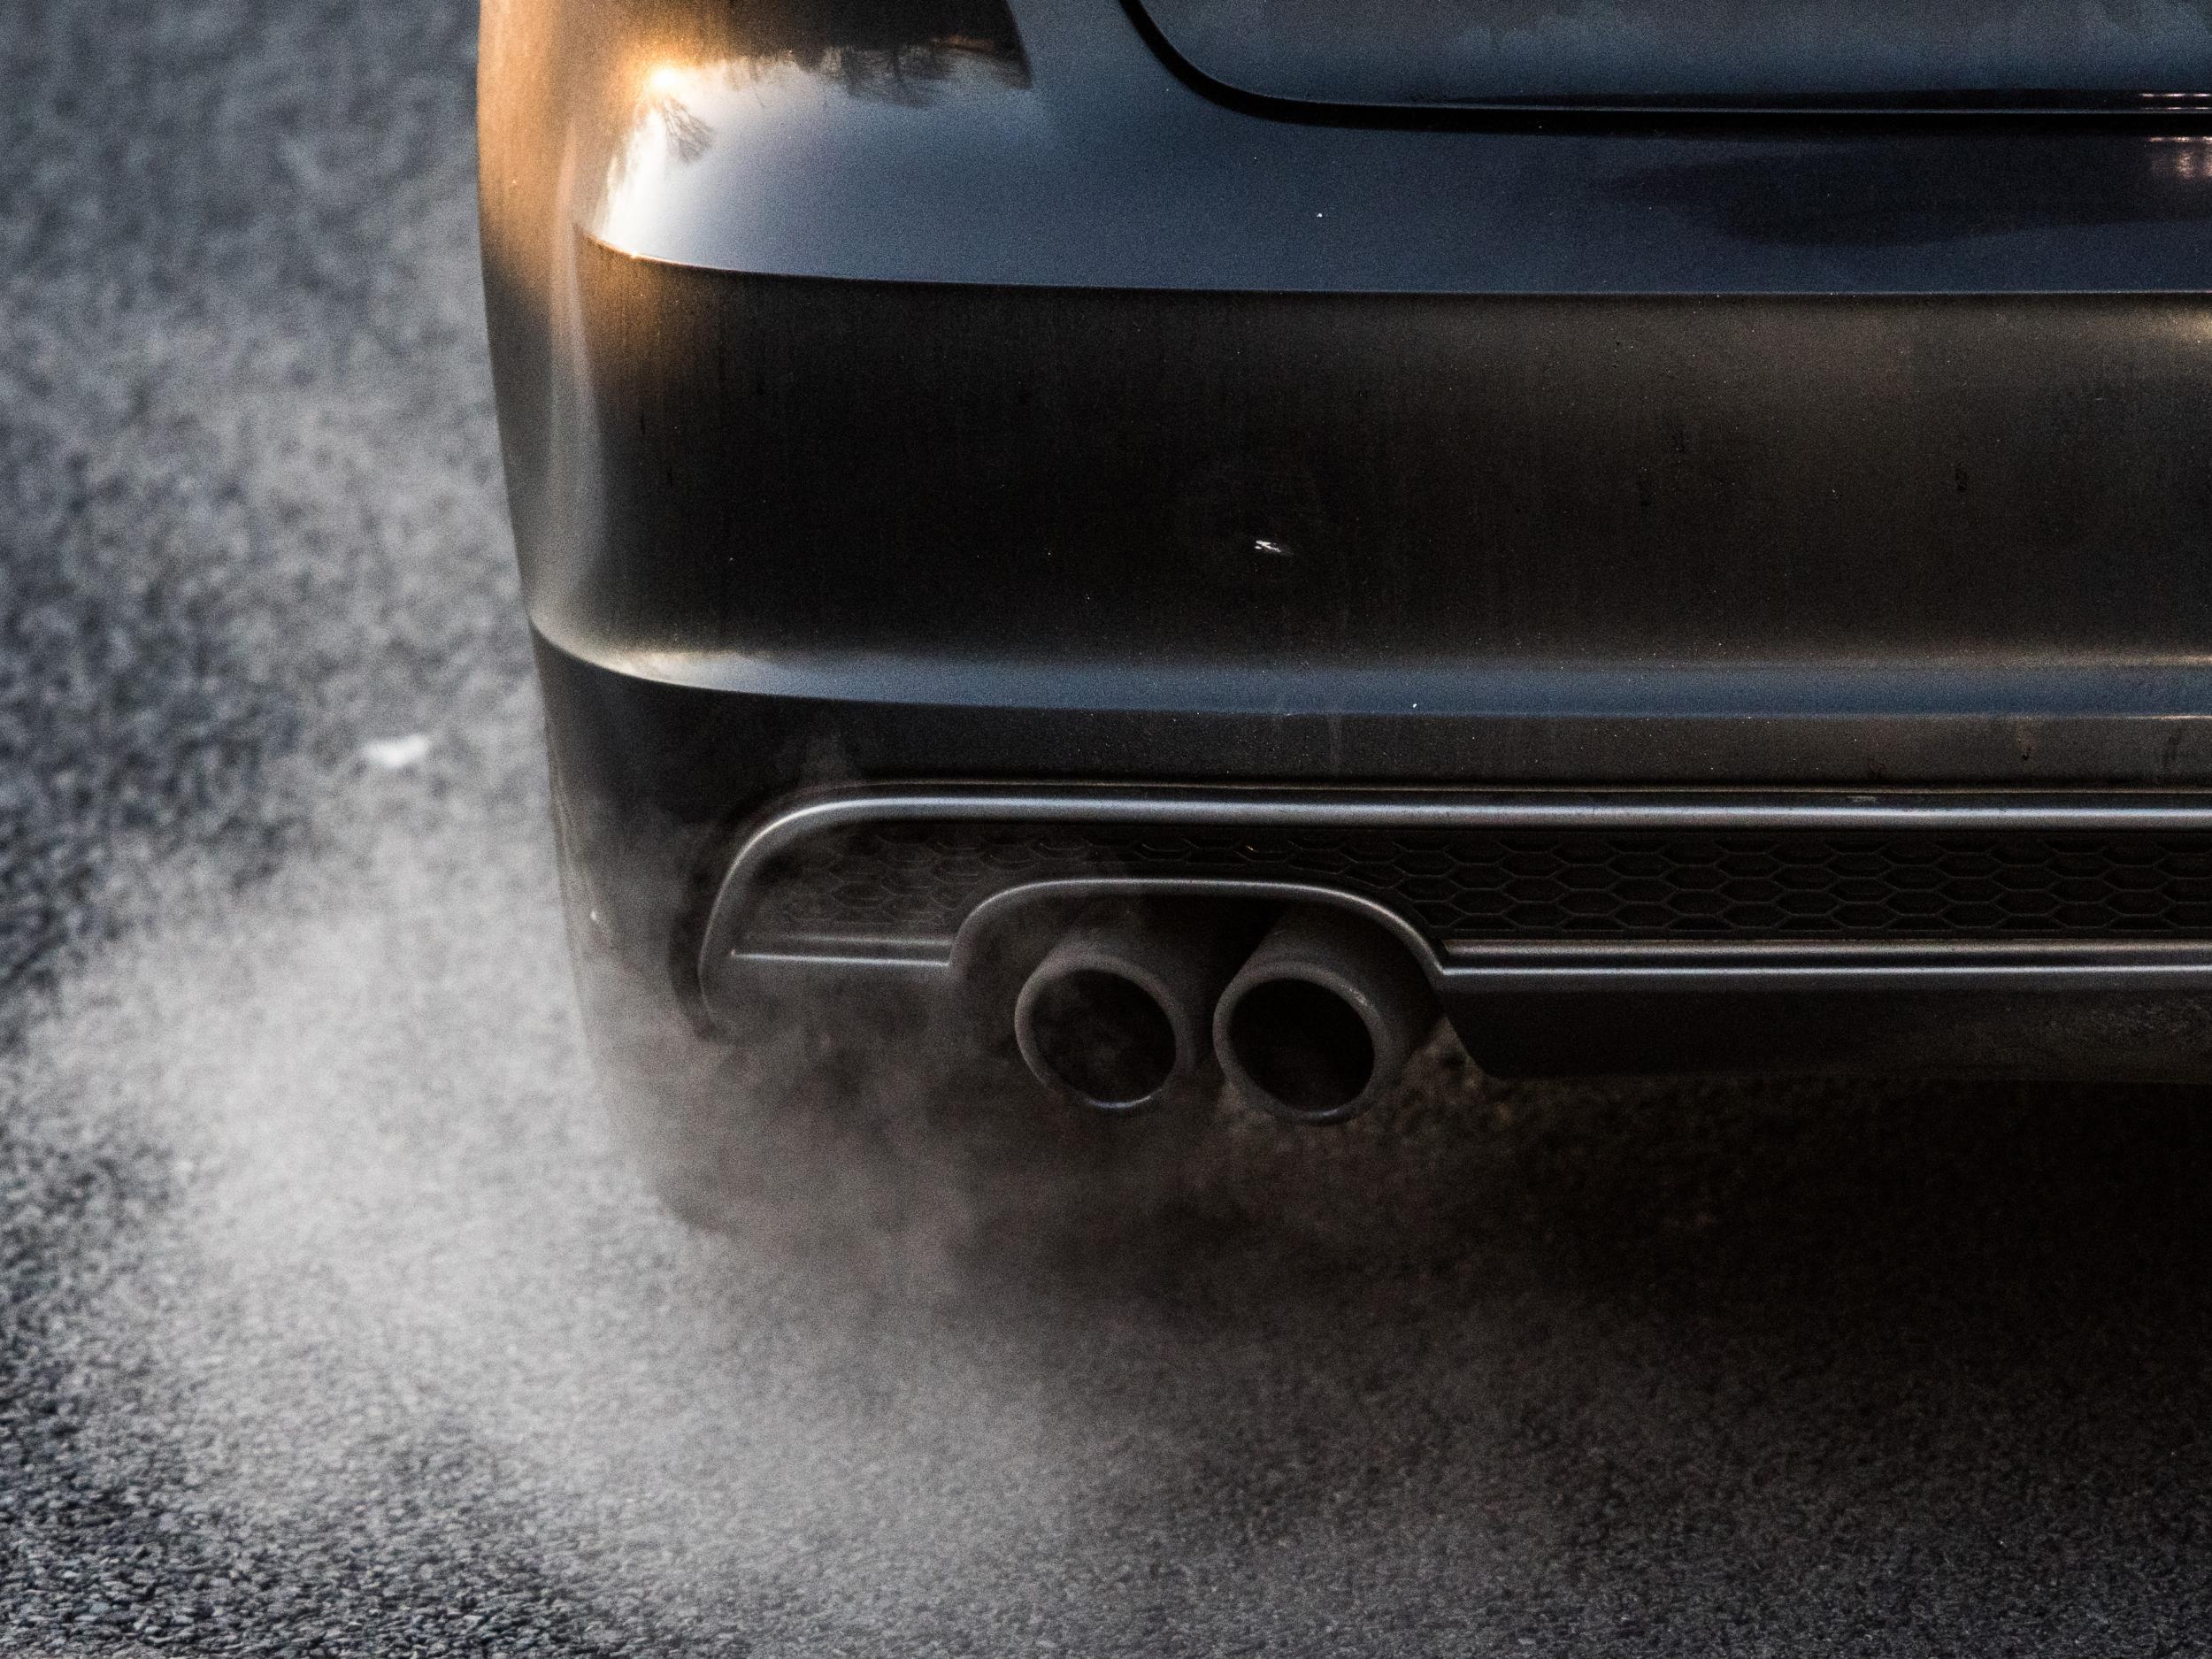 The prospect of offering diesel drivers compensation to trade or modify high-polluting vehicles was raised last year